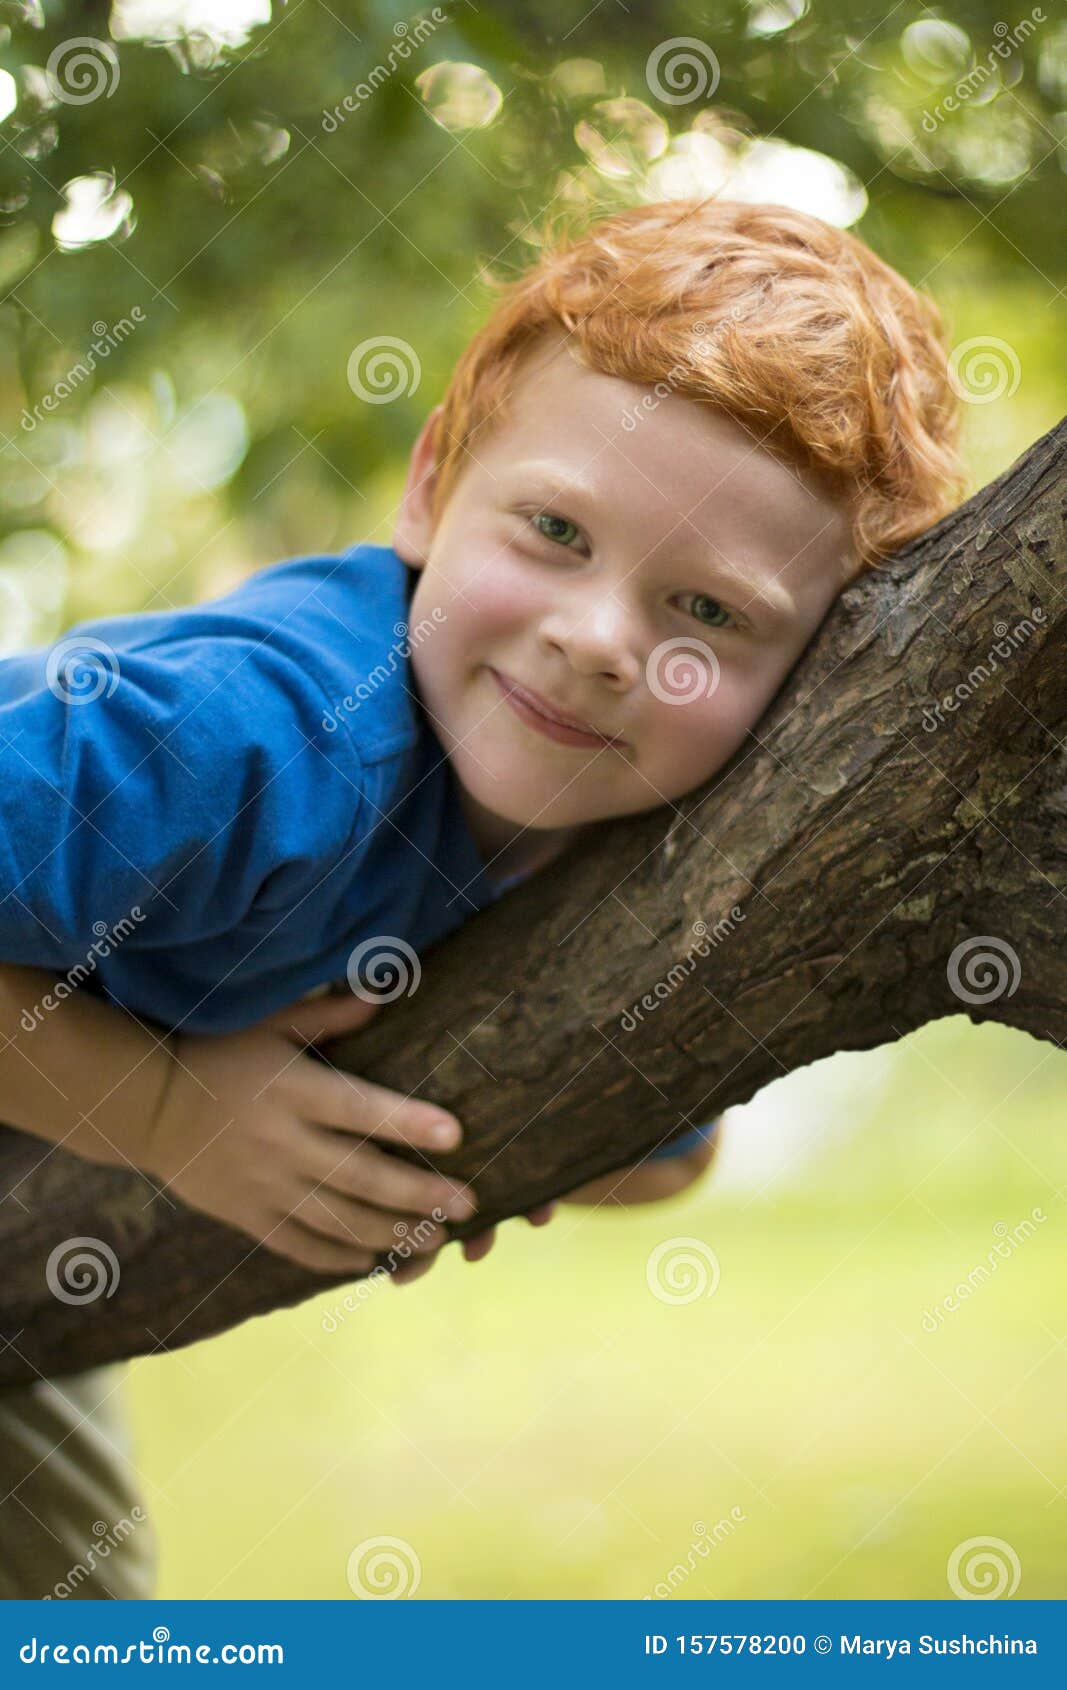 European Boy with Green Eyes Looking Directly at the Camera, Close-up.  Funny Little Child with Curly Ginger Hair and Stock Photo - Image of  beauty, healthy: 157578200